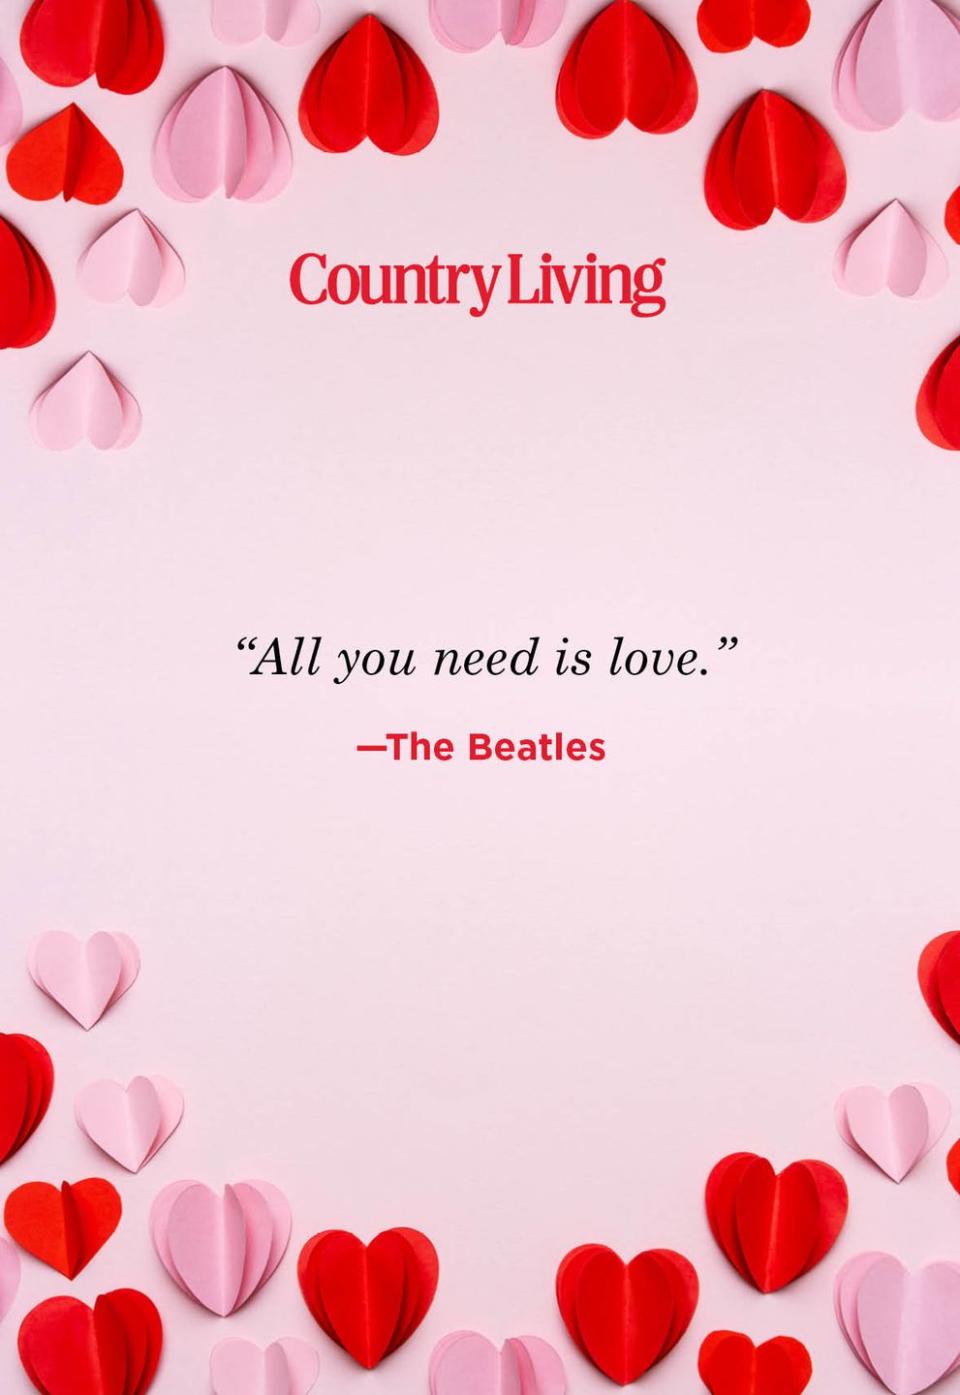 <p>"All you need is love."</p>